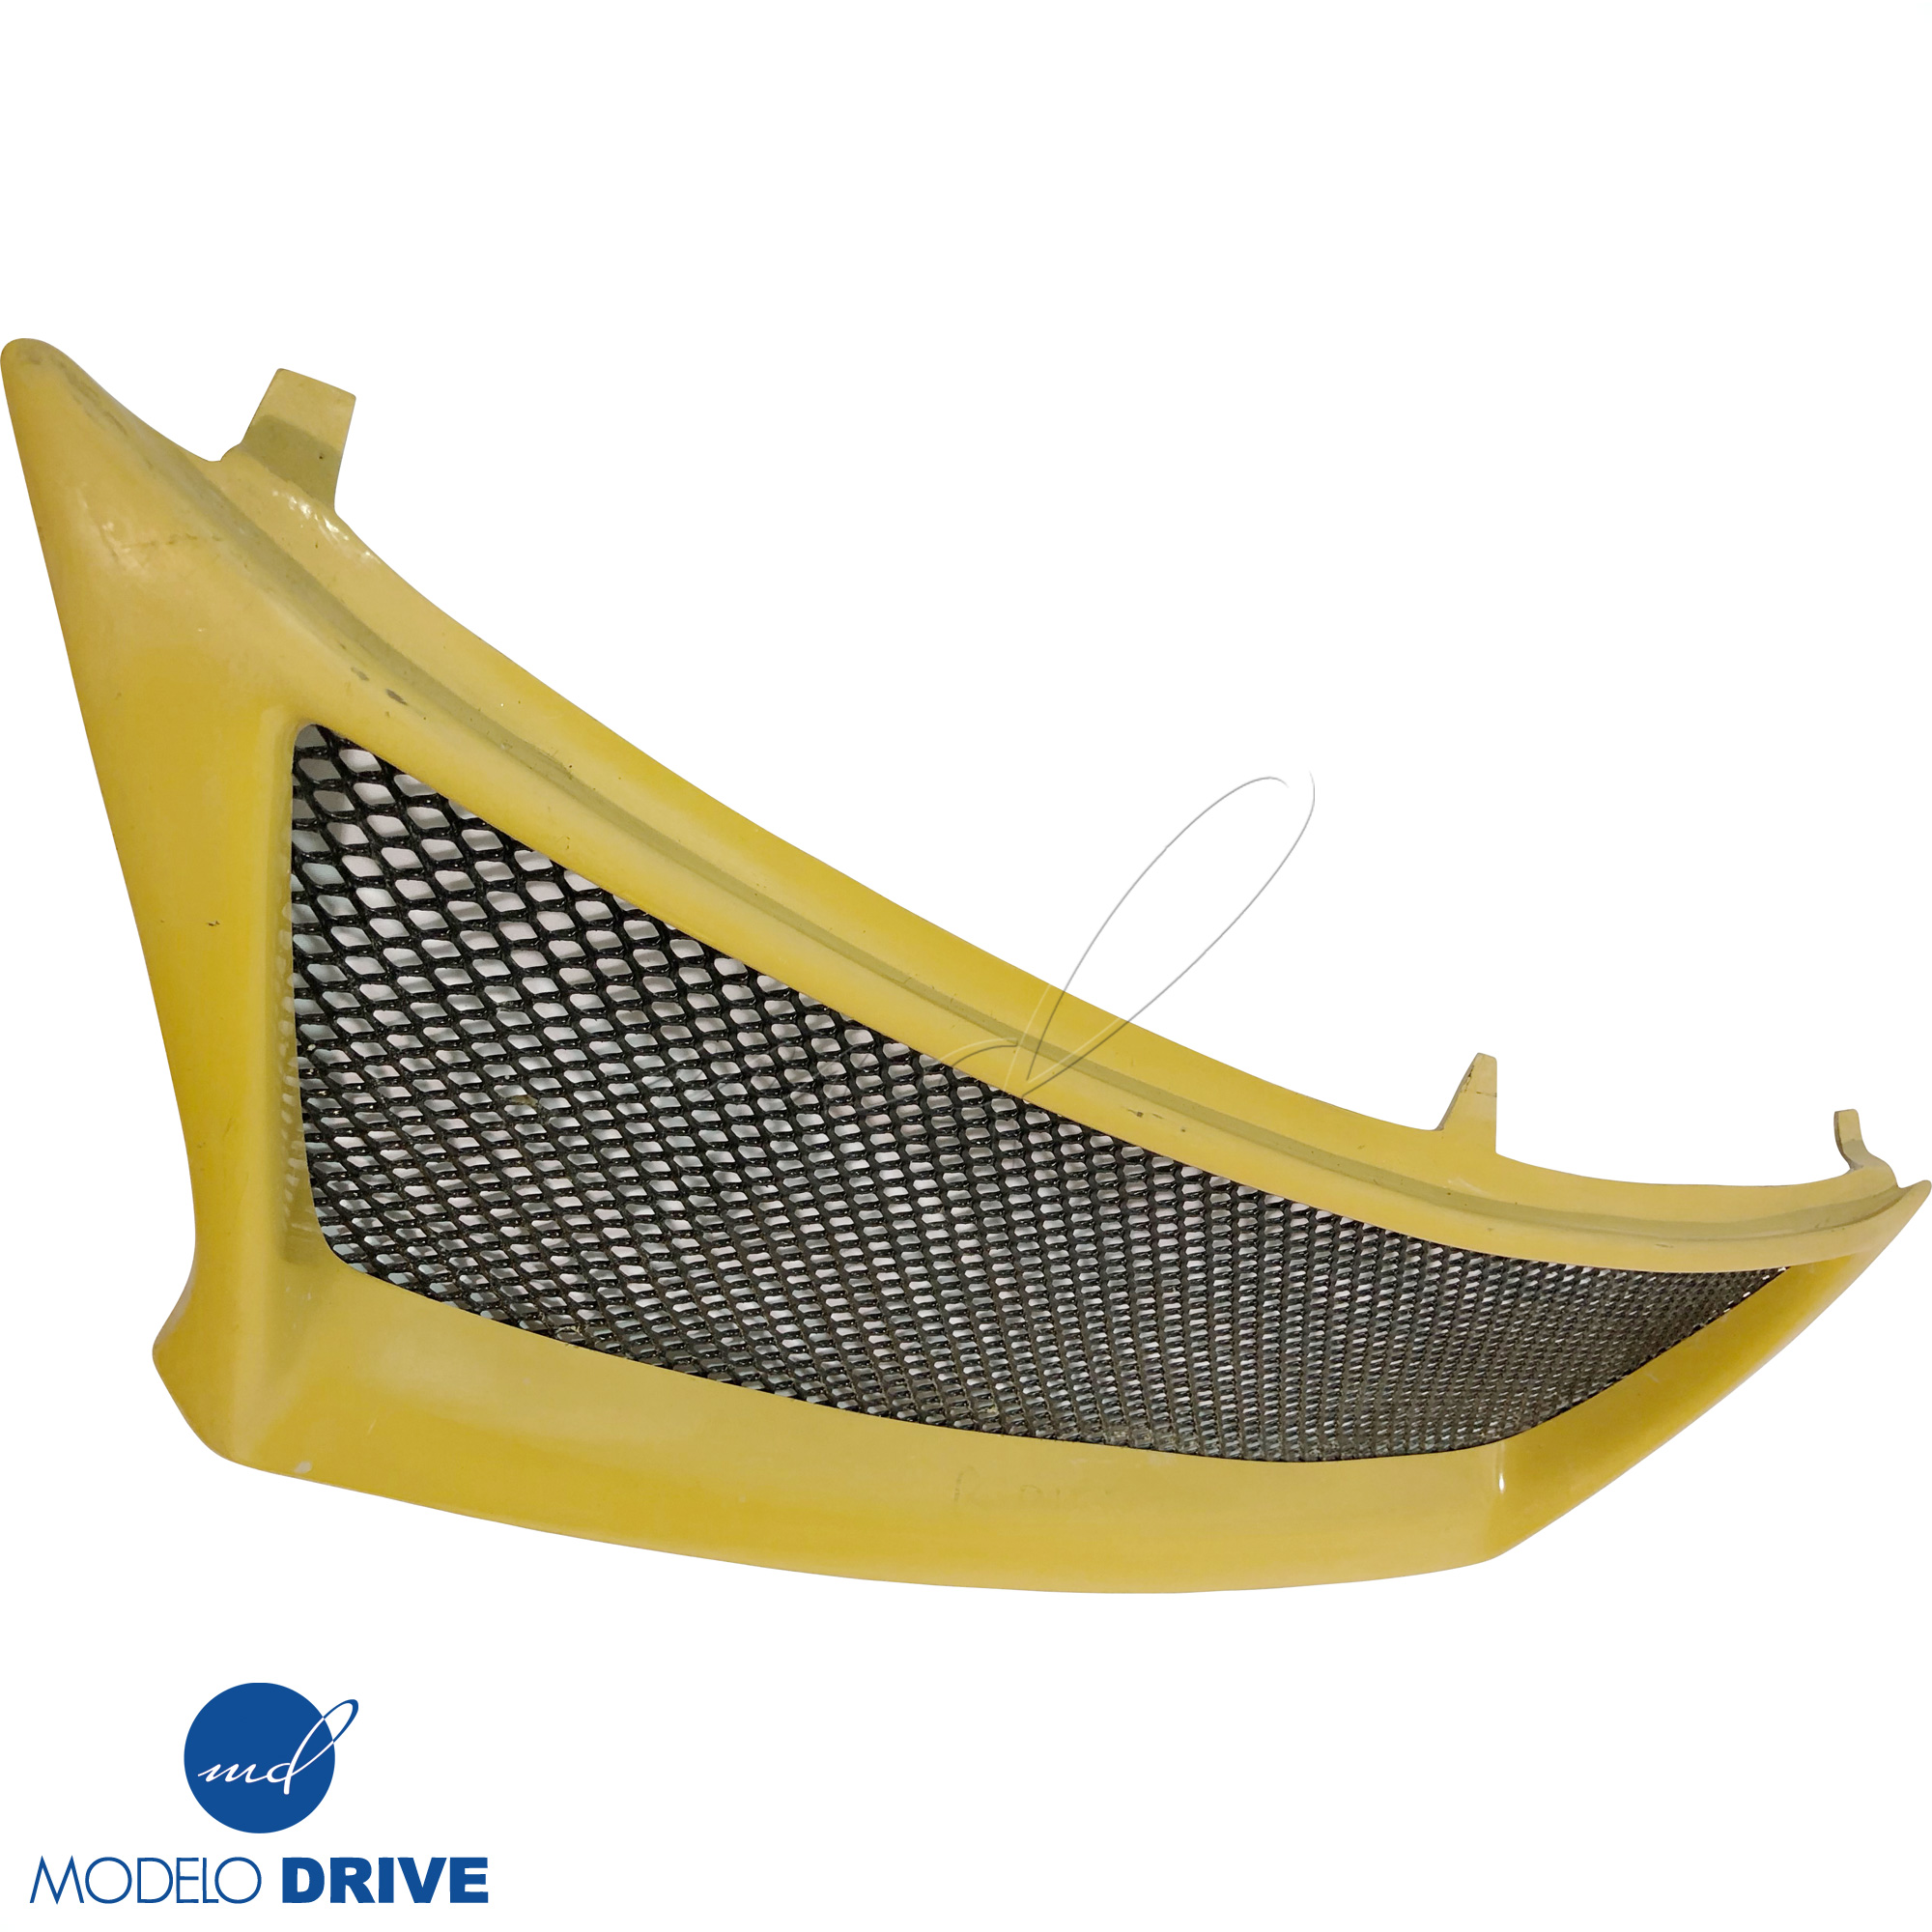 ModeloDrive FRP WAL BISO Front Grille > Lexus IS-Series IS-F 2012-2013 - Image 4